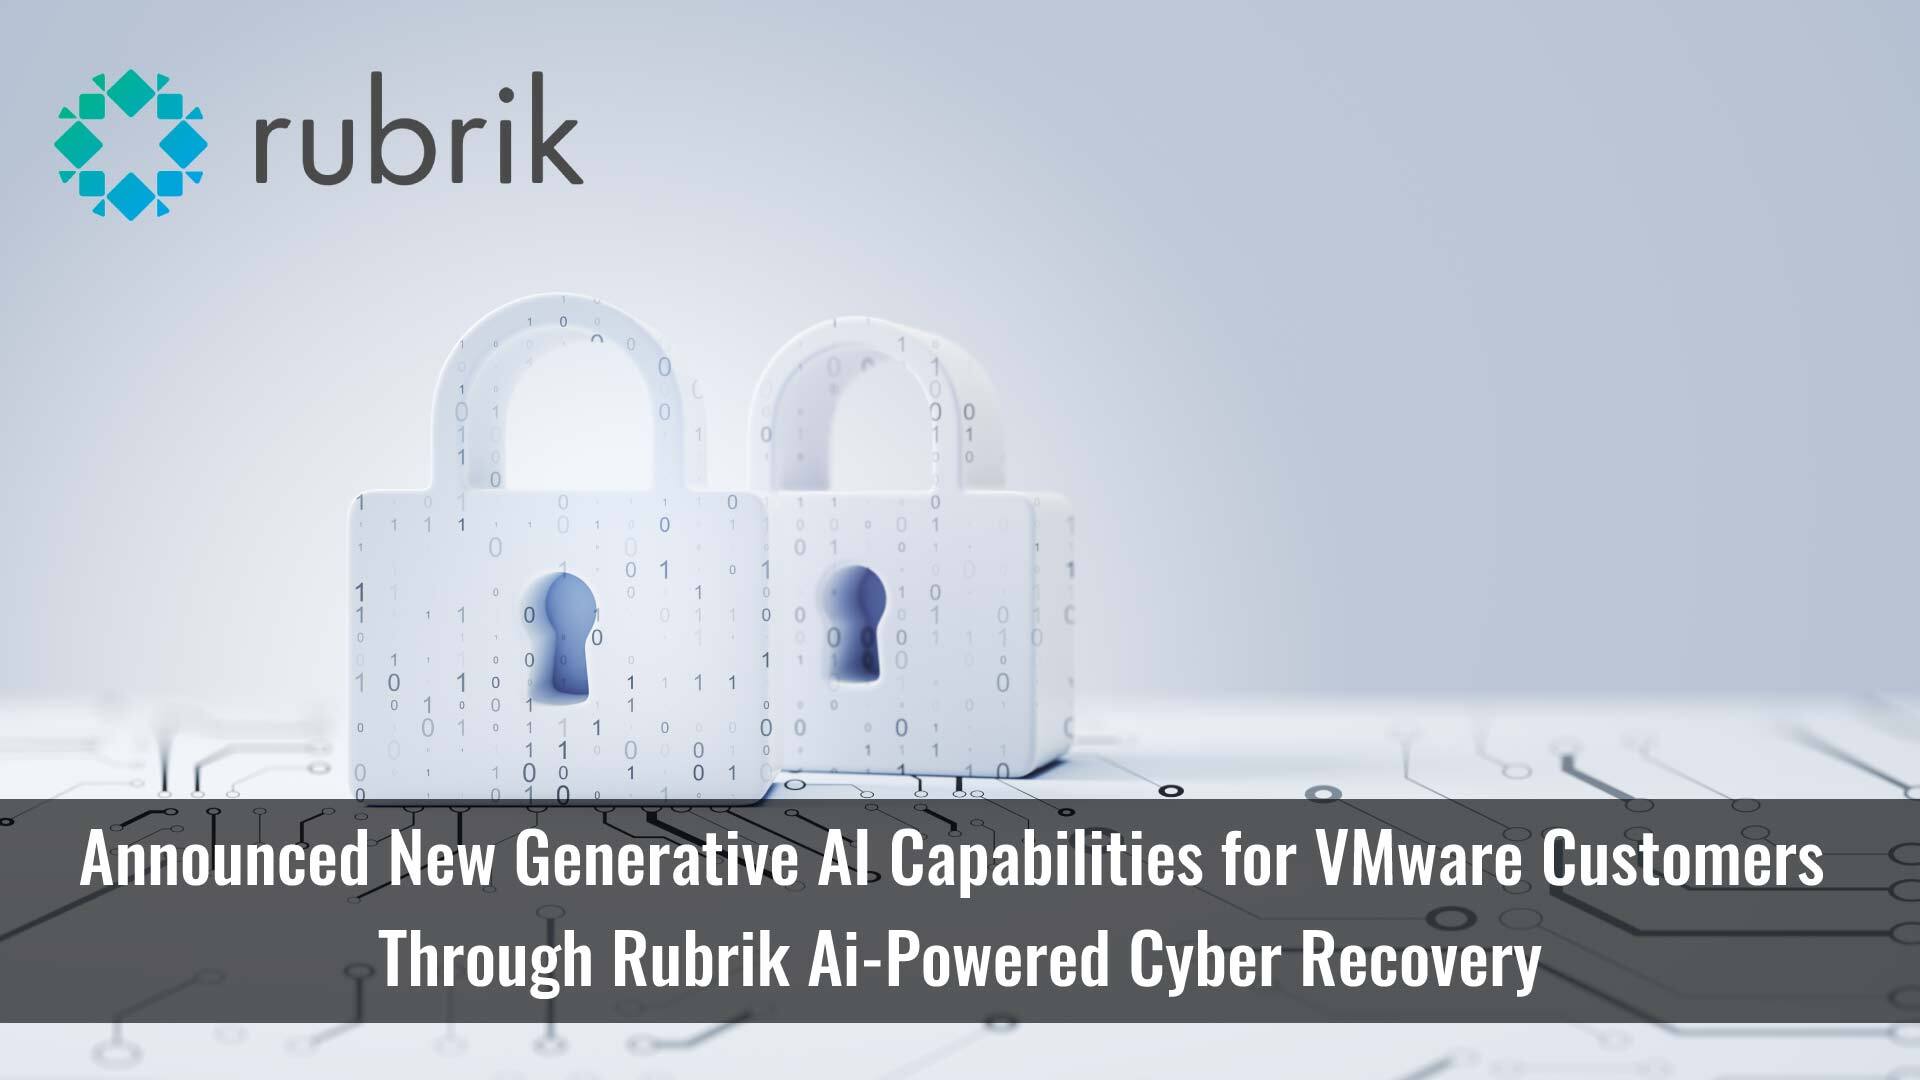 Rubrik Brings Power of AI to VMware Customers to Accelerate Cyber Recovery